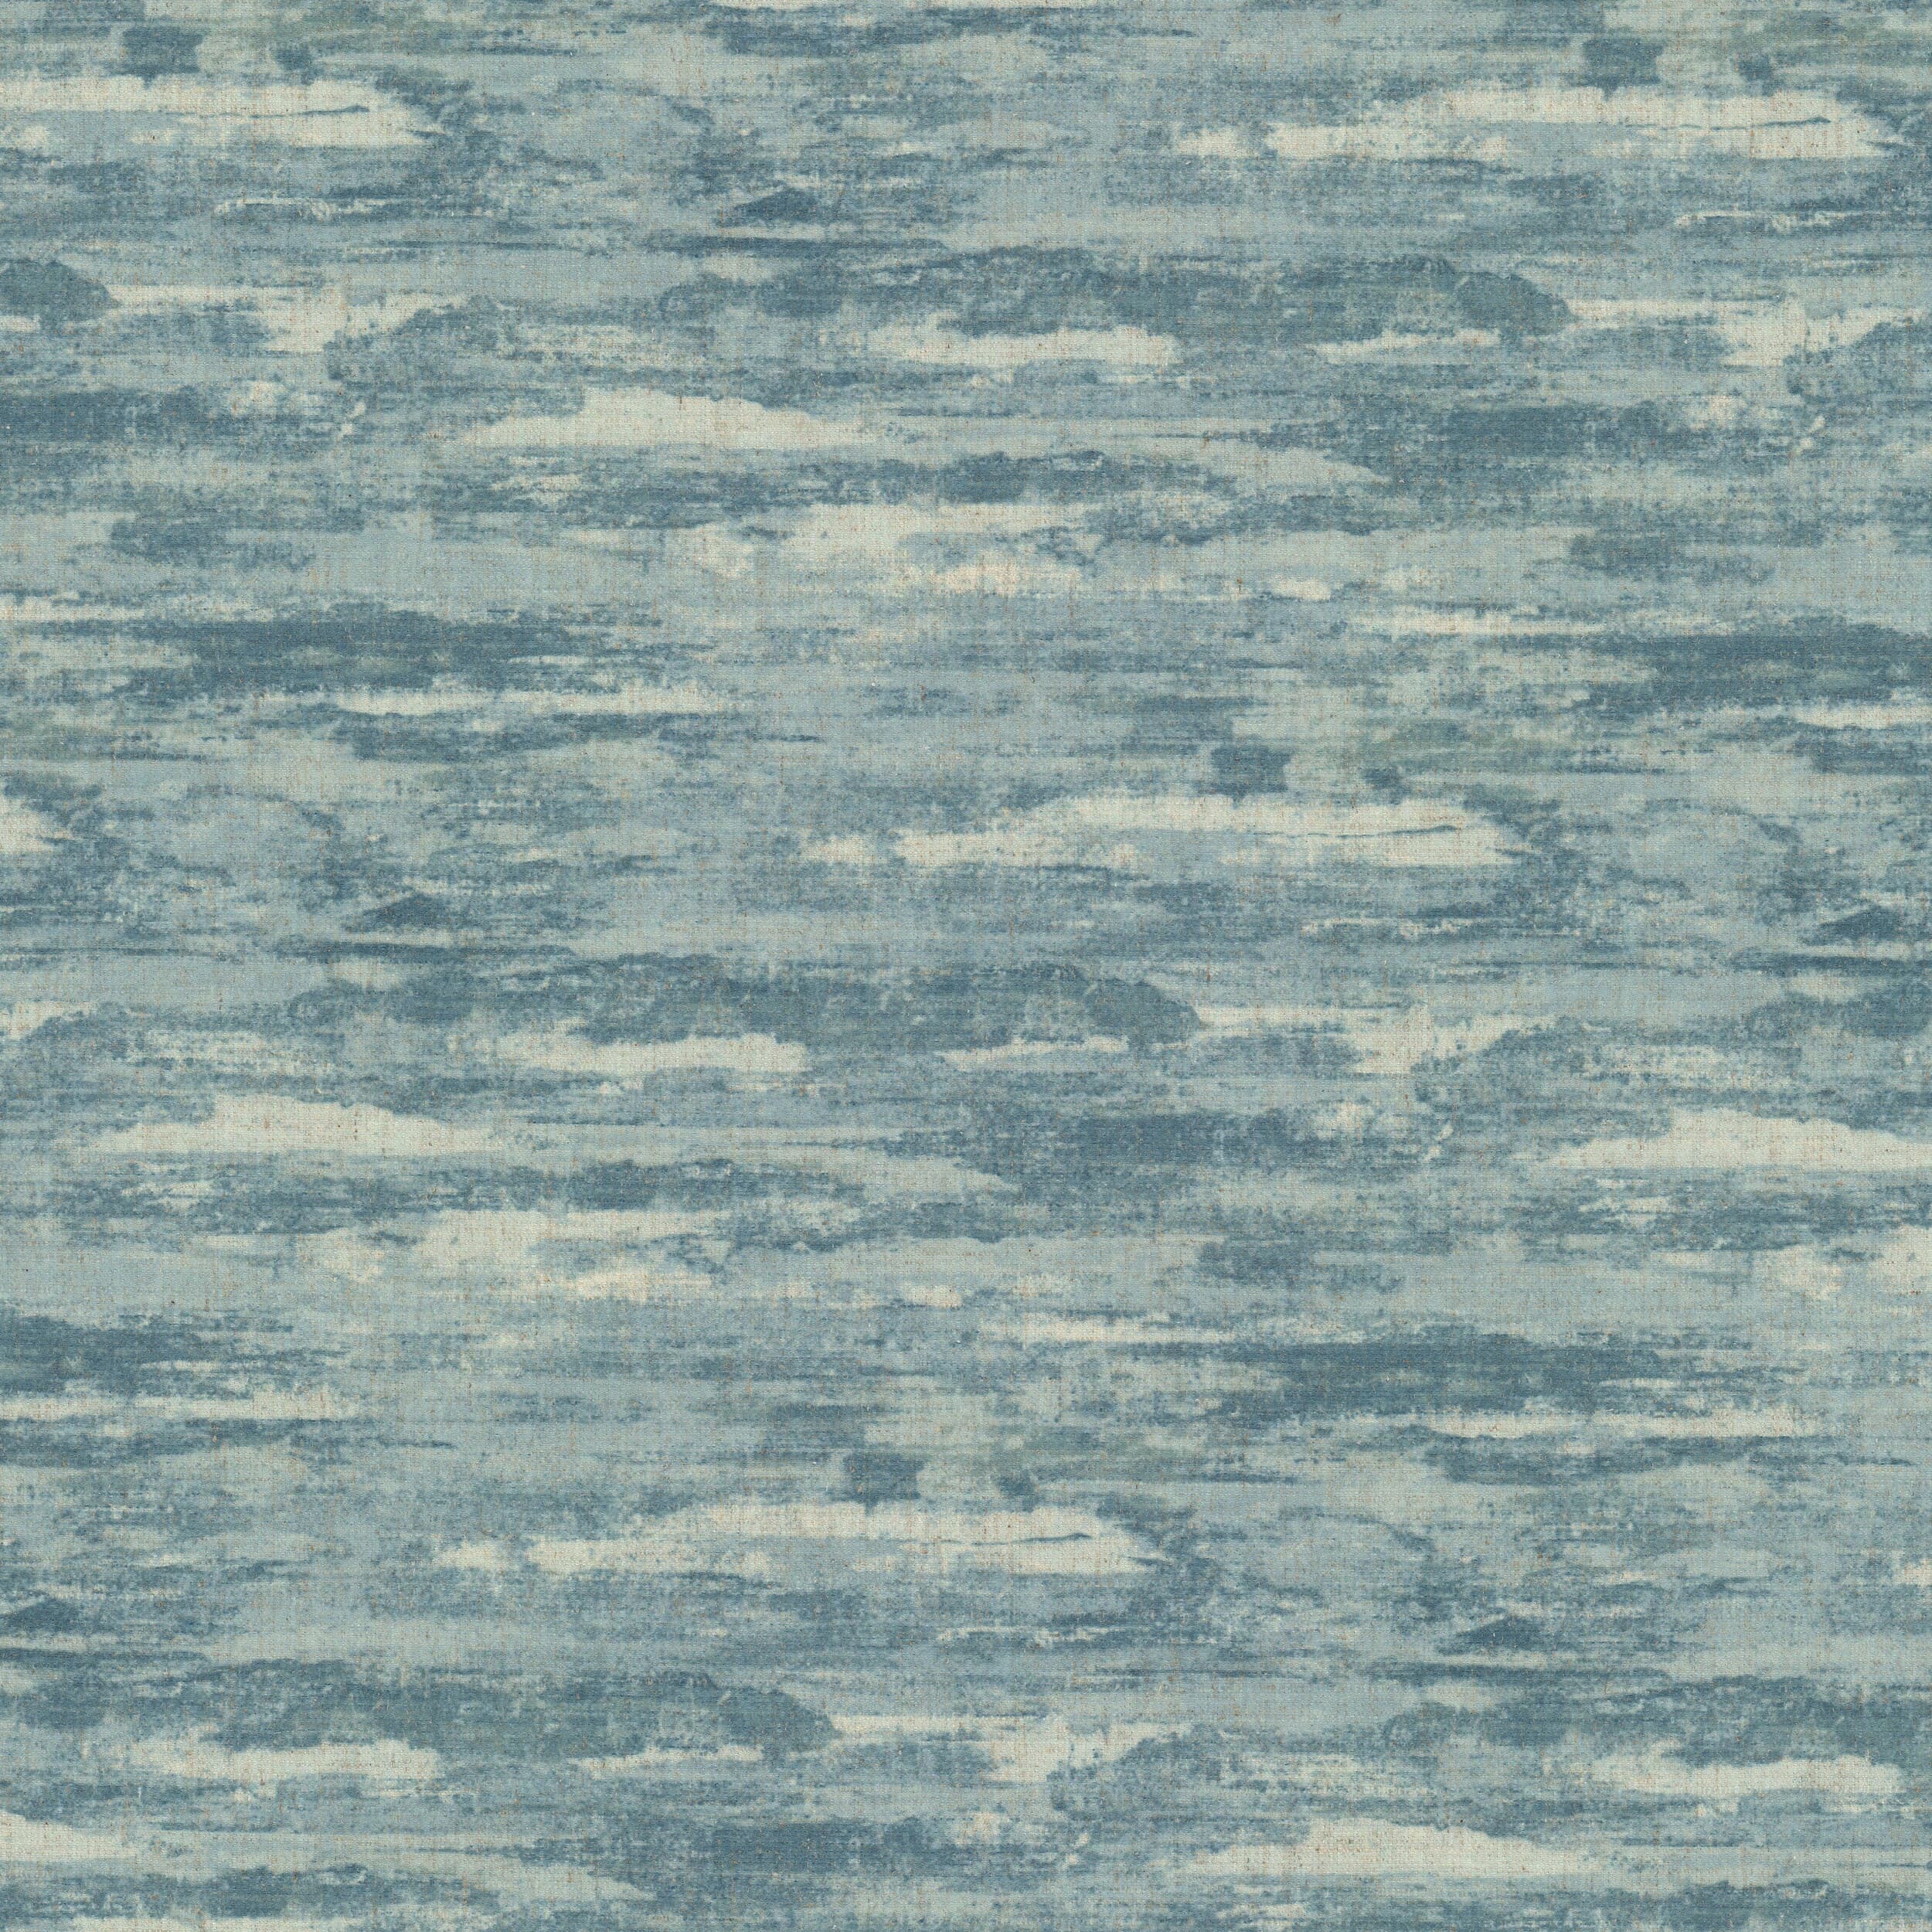 Suite 1 Teal by Stout Fabric